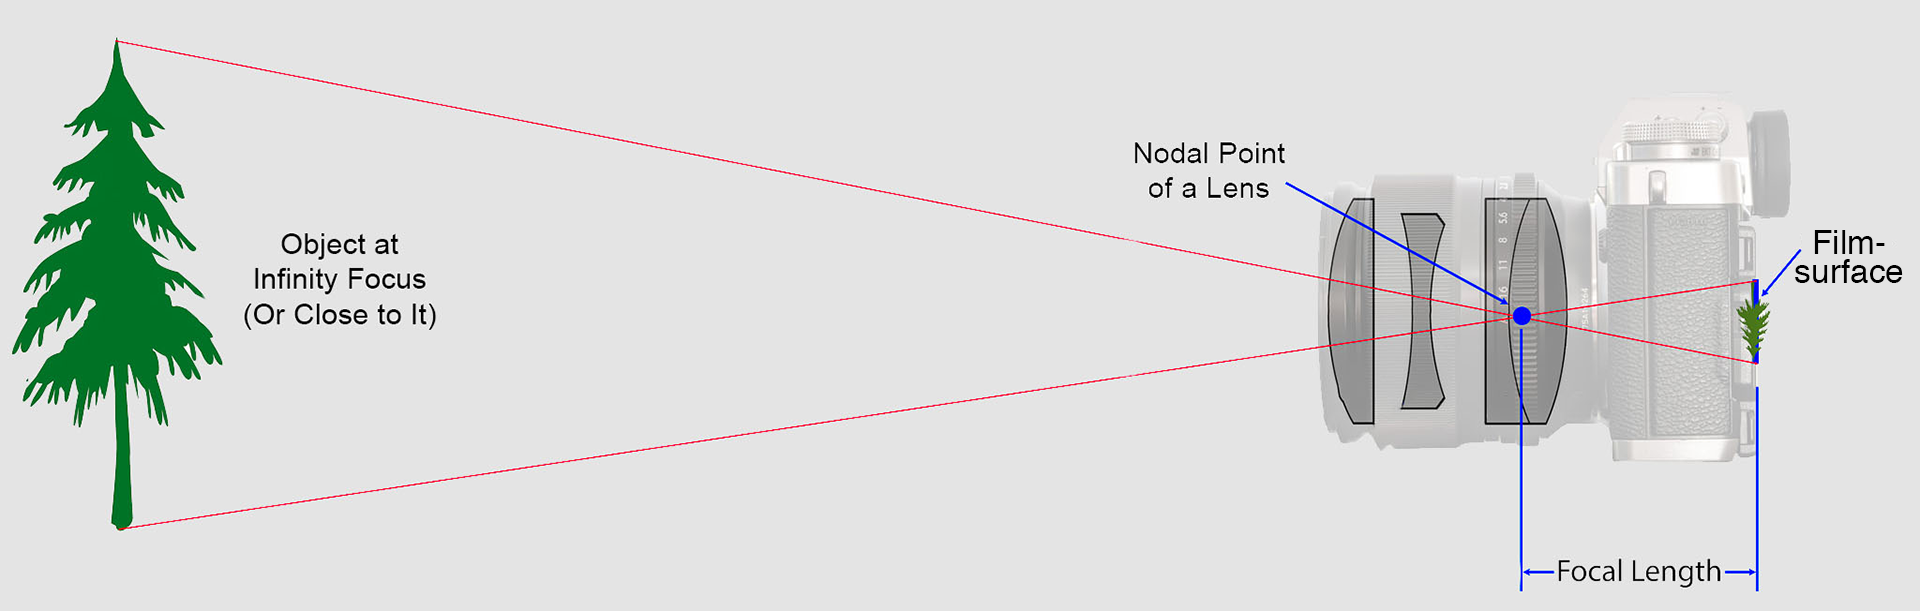 1920x611px-what-is-focal-length-in-photography-diagram-vWA24